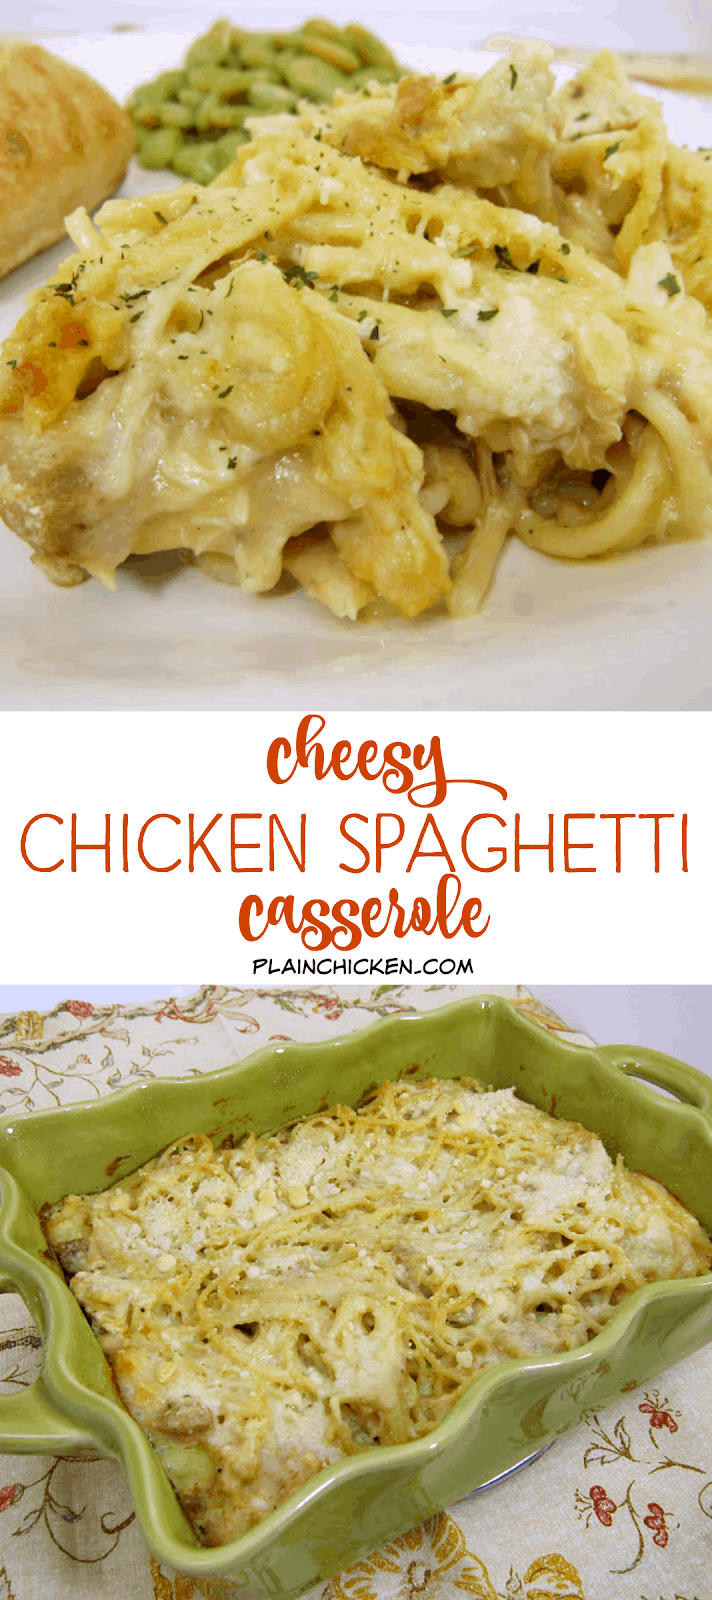 Cheesy Chicken Spaghetti Casserole - spaghetti, chicken, cream of chicken, milk, onion, garlic, mozzarella and parmesan cheese - Ready in 30 minutes! We love this quick weeknight meal!! Can make ahead of time and freeze or refrigerate for later. Kids love this casserole!!